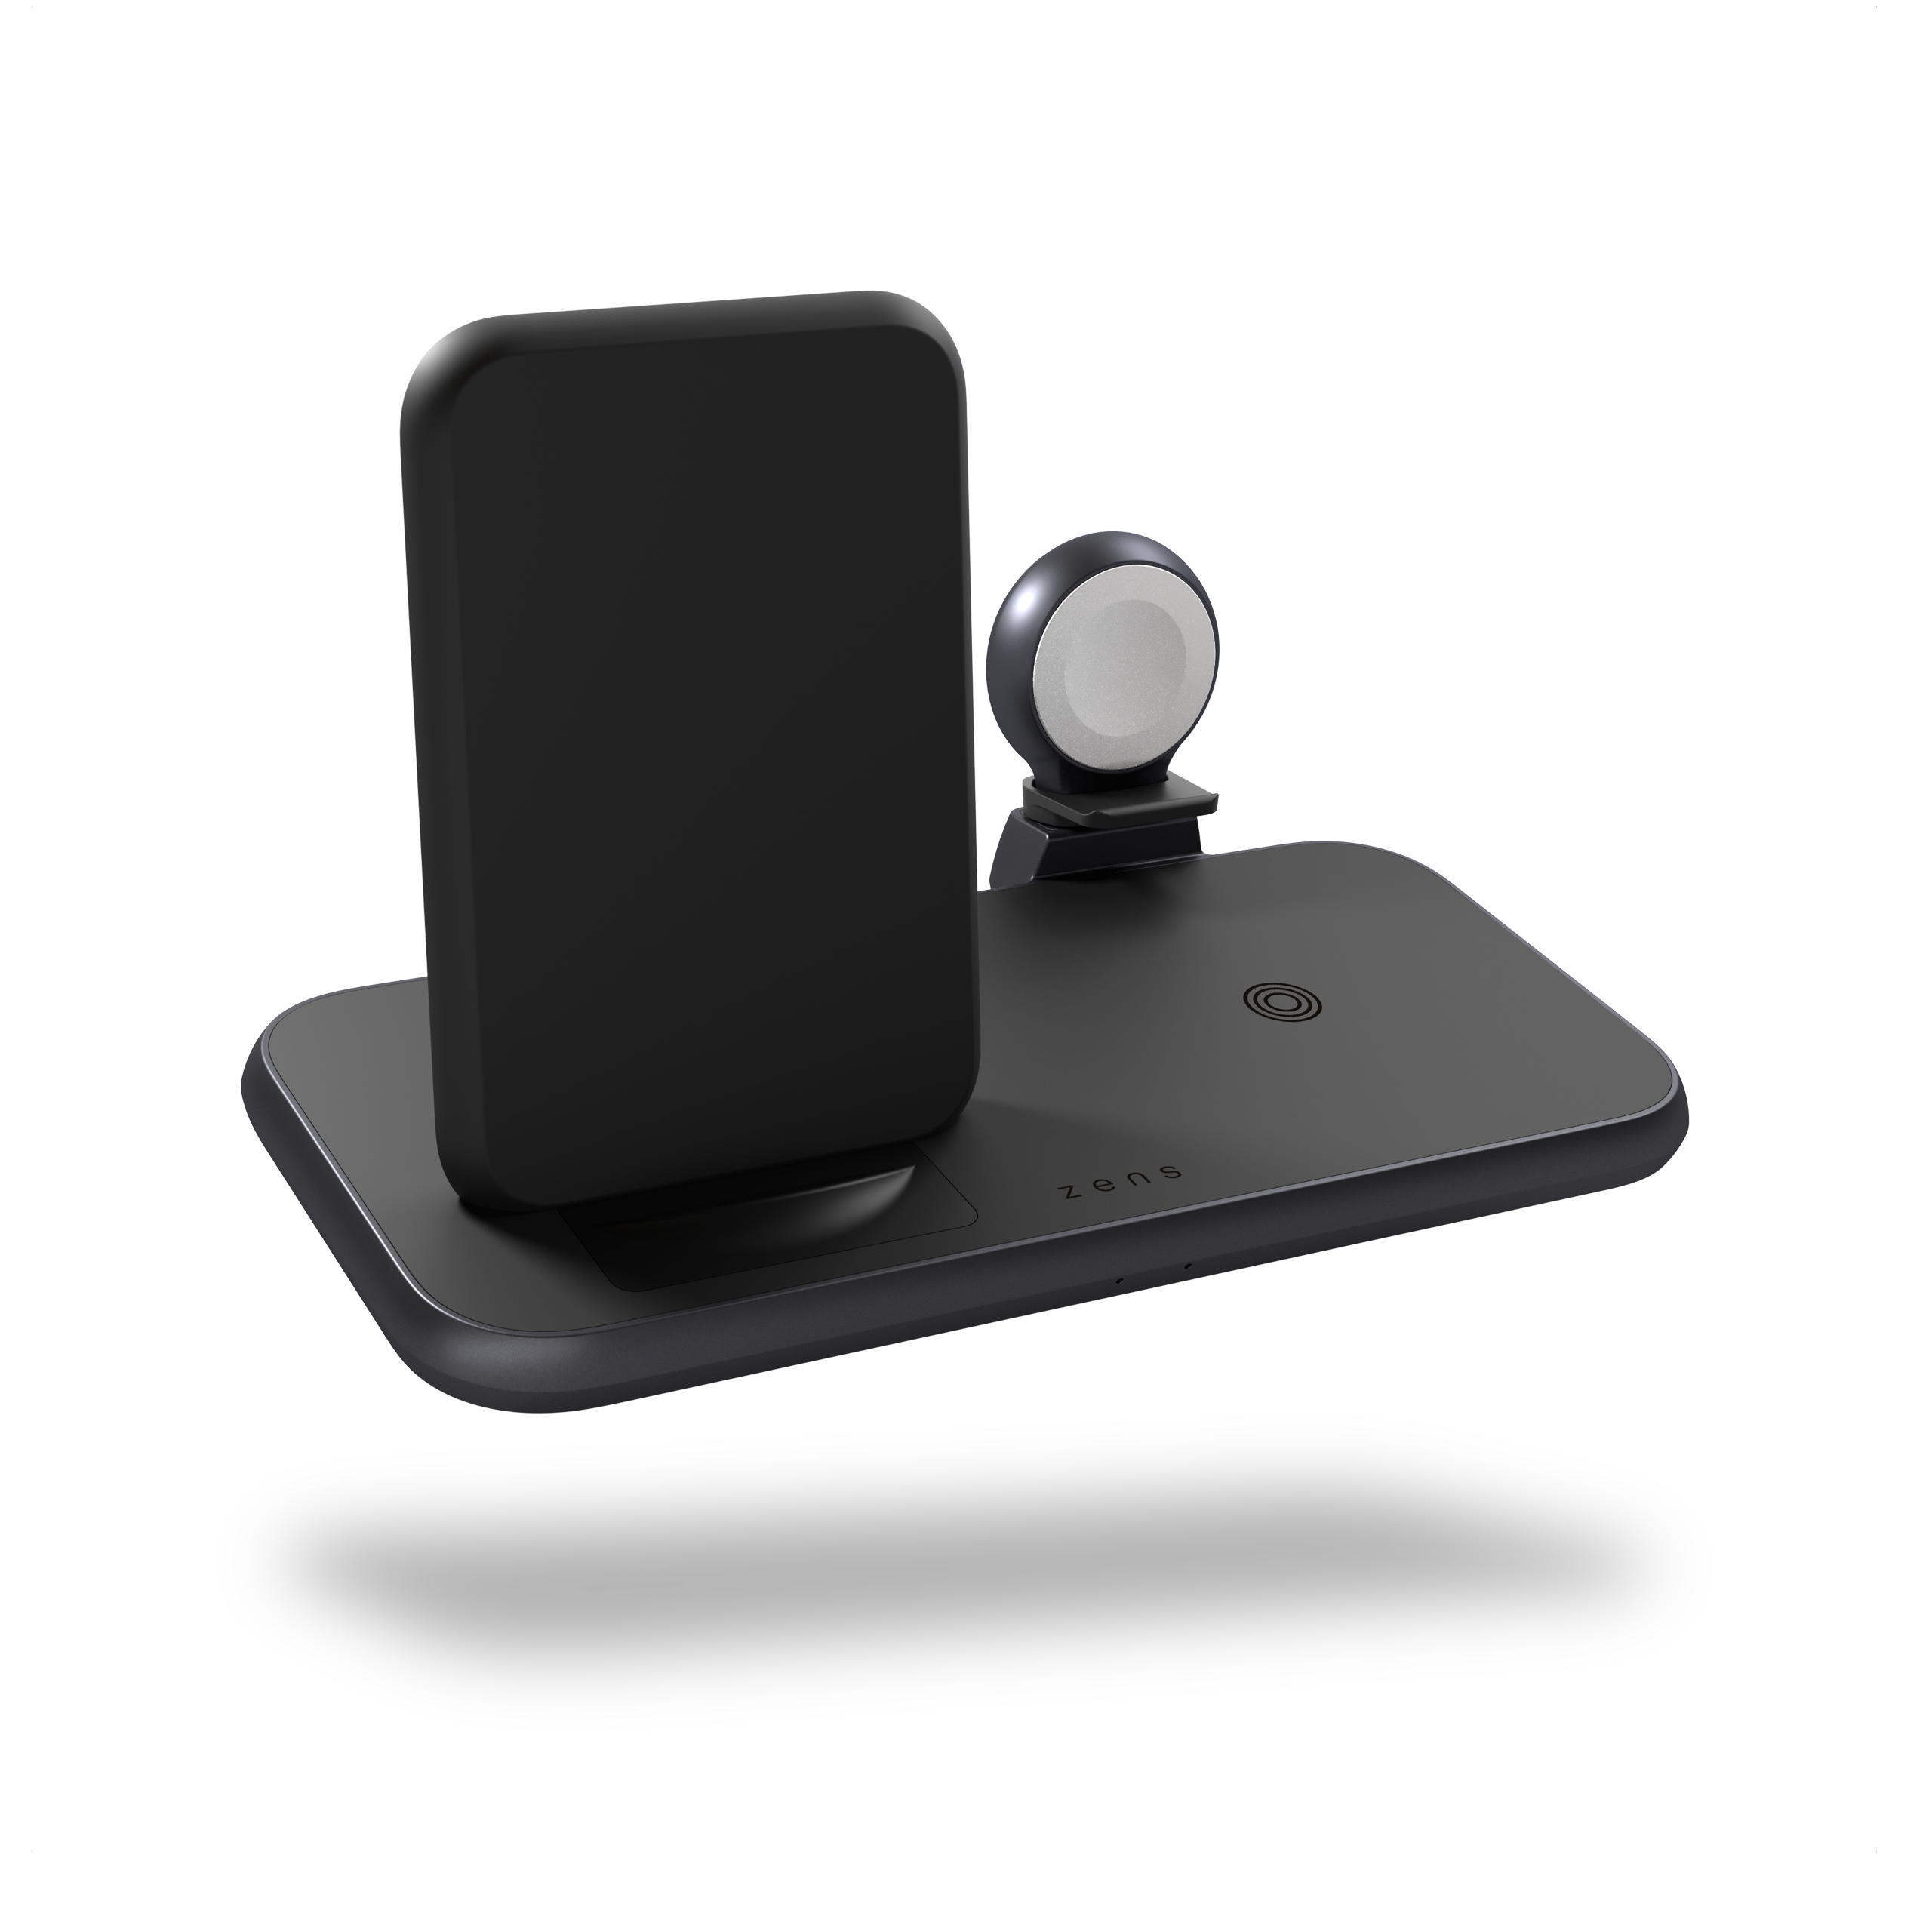 ZENS Alum. 4 in 1 Stand Wireless Charger ZEDC15B/00 - CMS01